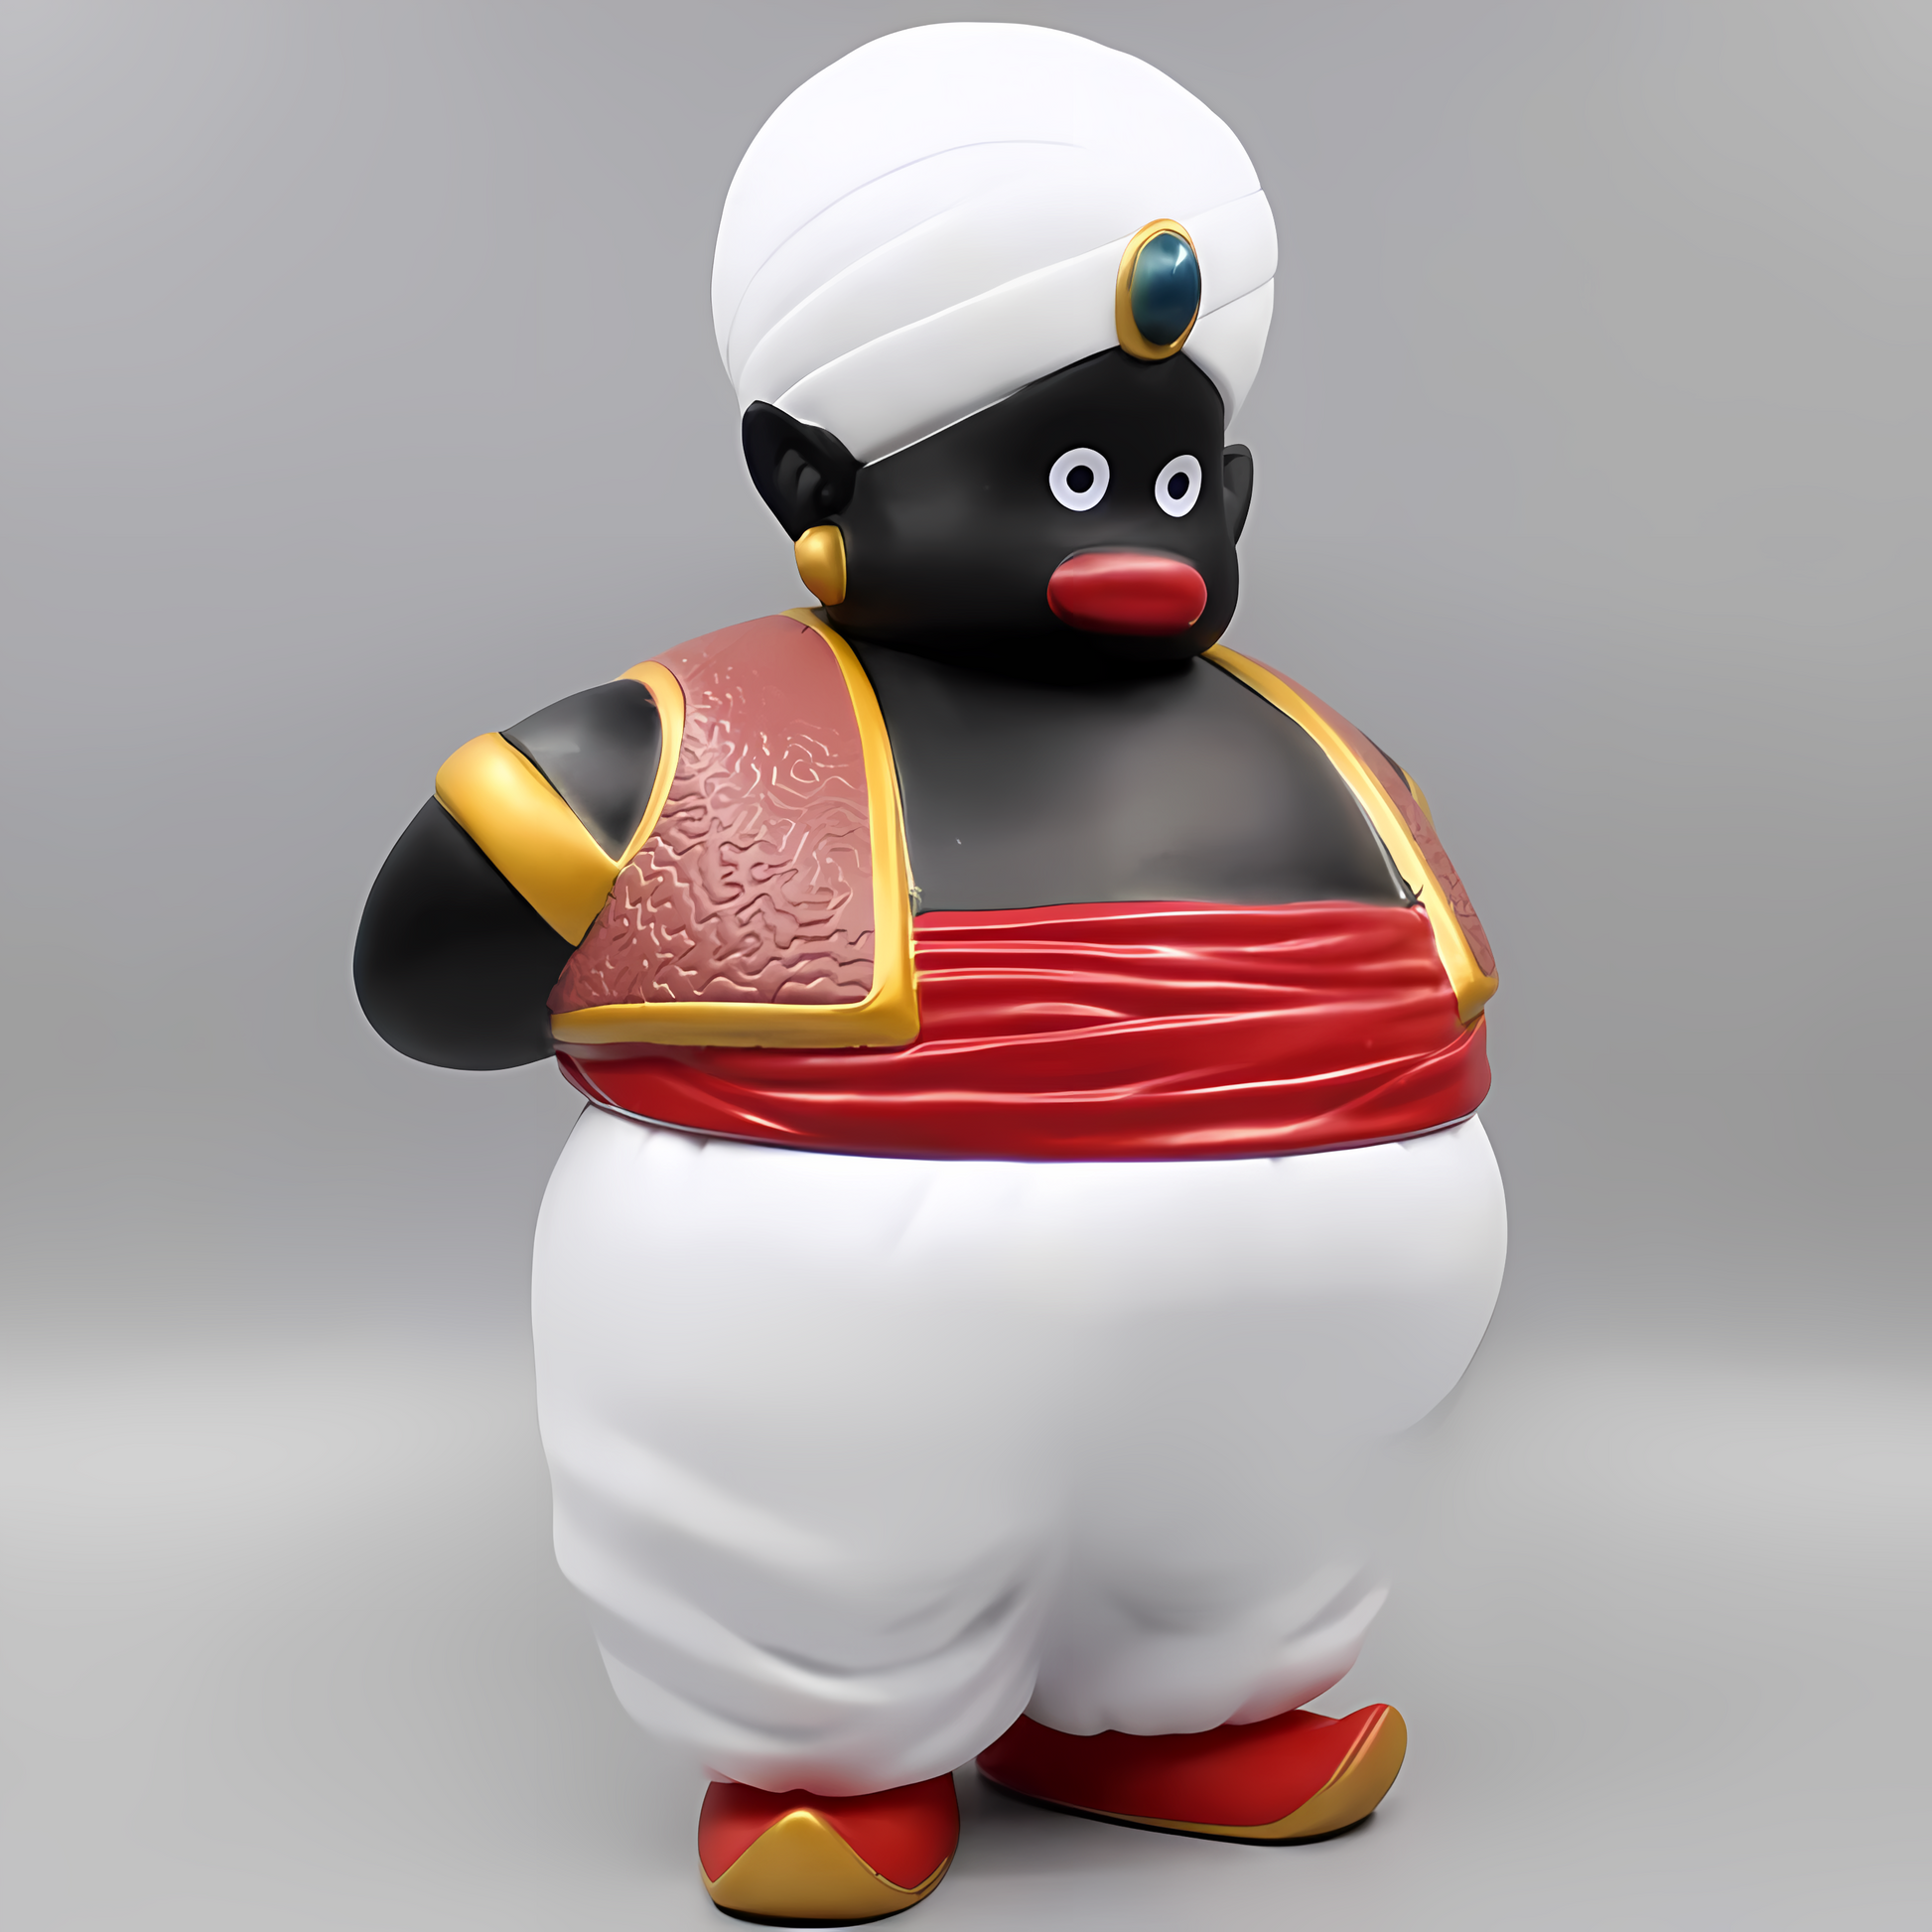 Frontal view of 'Mystical Guardian Popo' collectible figure from Dragon Ball, with focus on the white turban adorned with a blue jewel and the character's gentle smile.